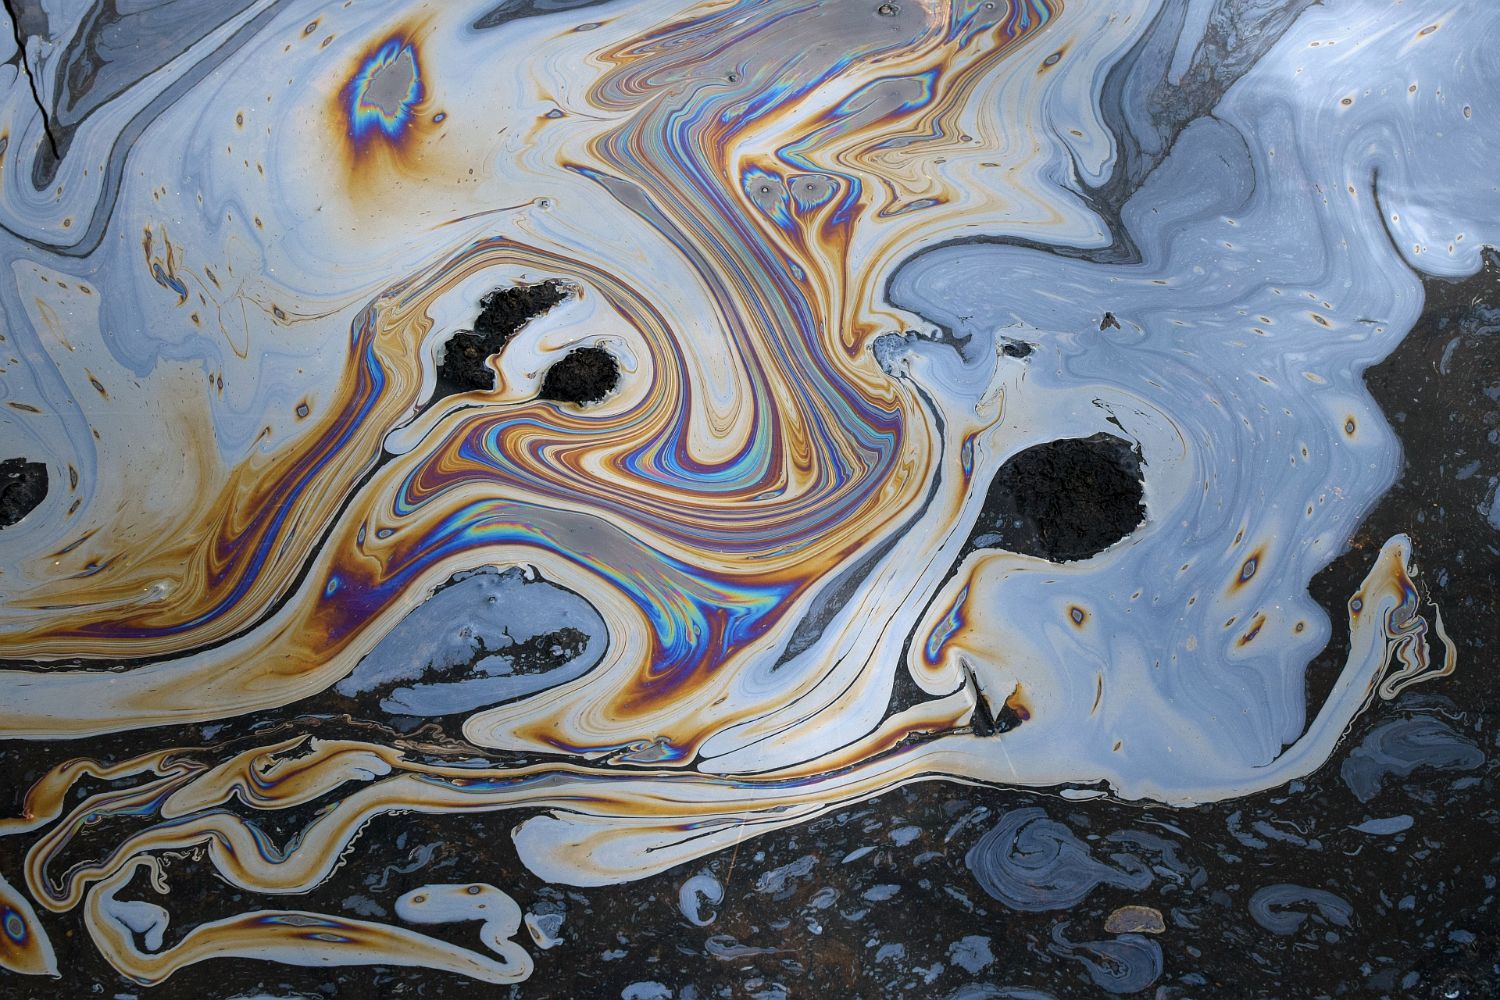 An image of chemicals on top of water